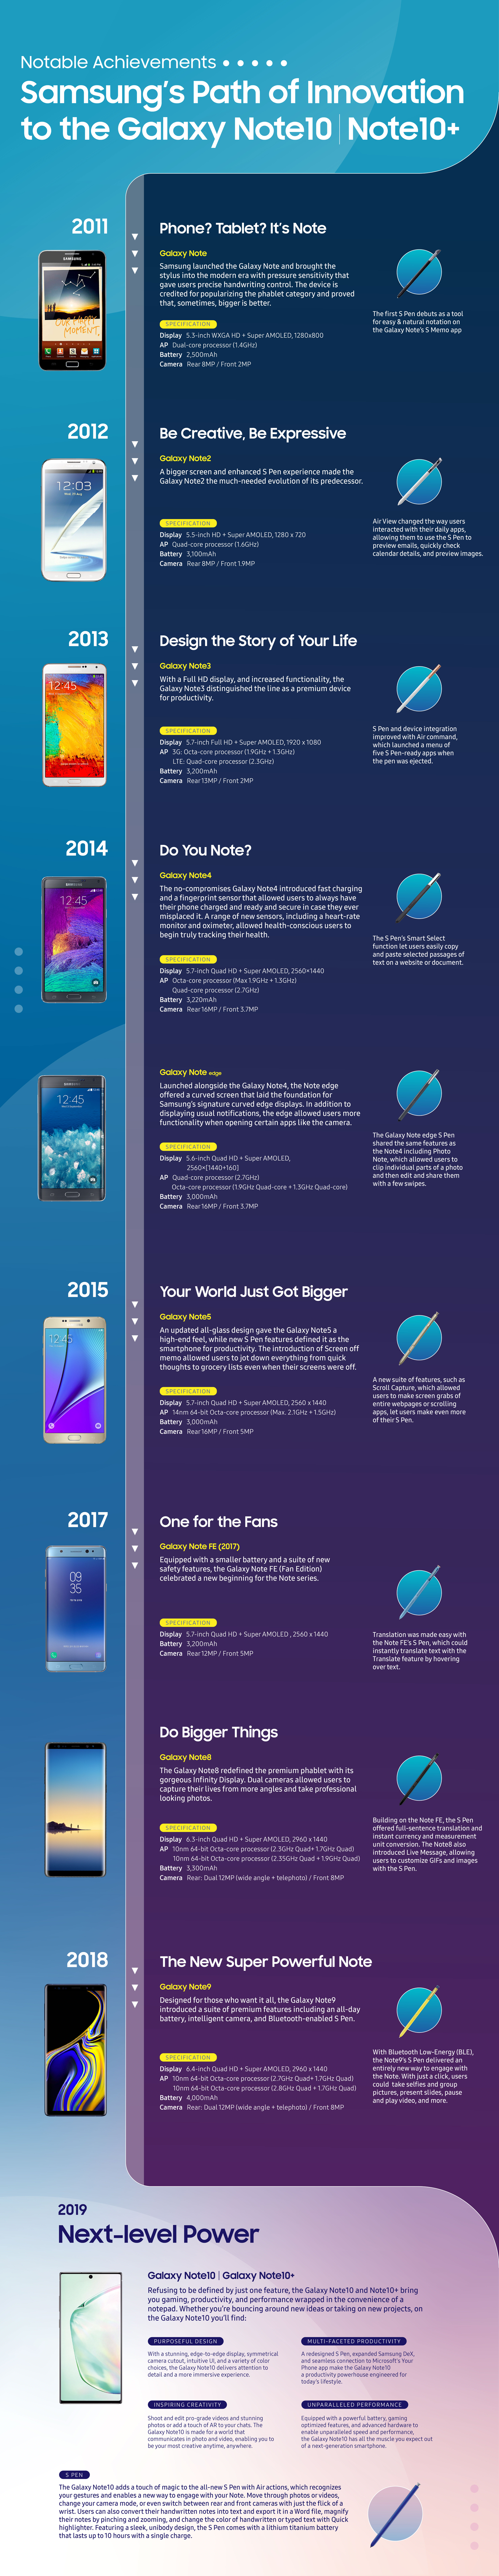 Galaxy Note 10 timeline infographic